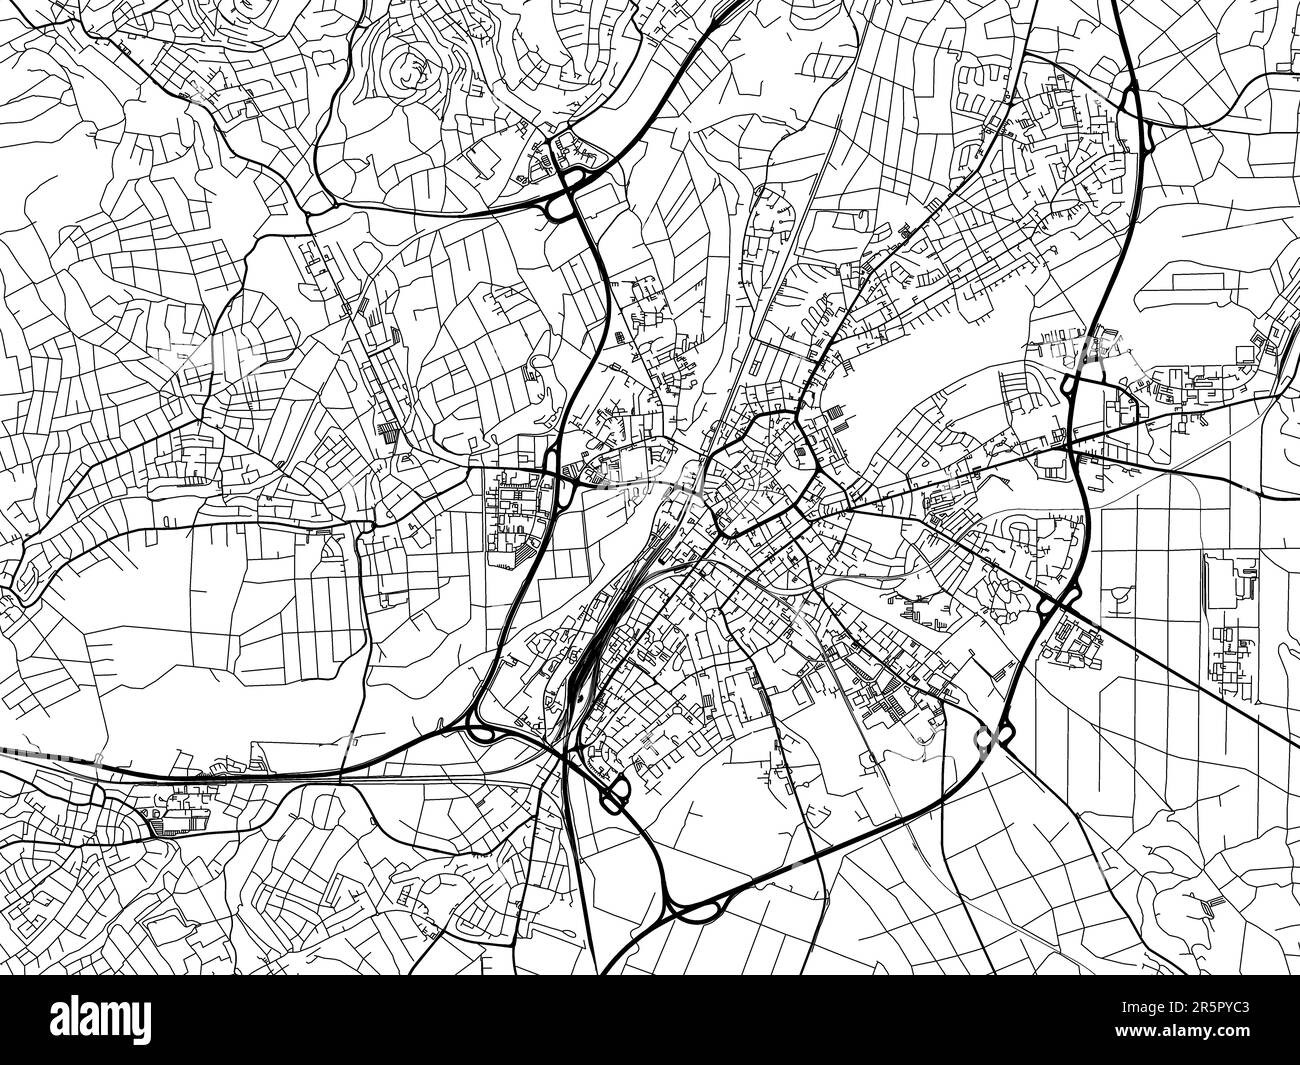 Vector road map of the city of  Giessen in Germany on a white background. Stock Photo